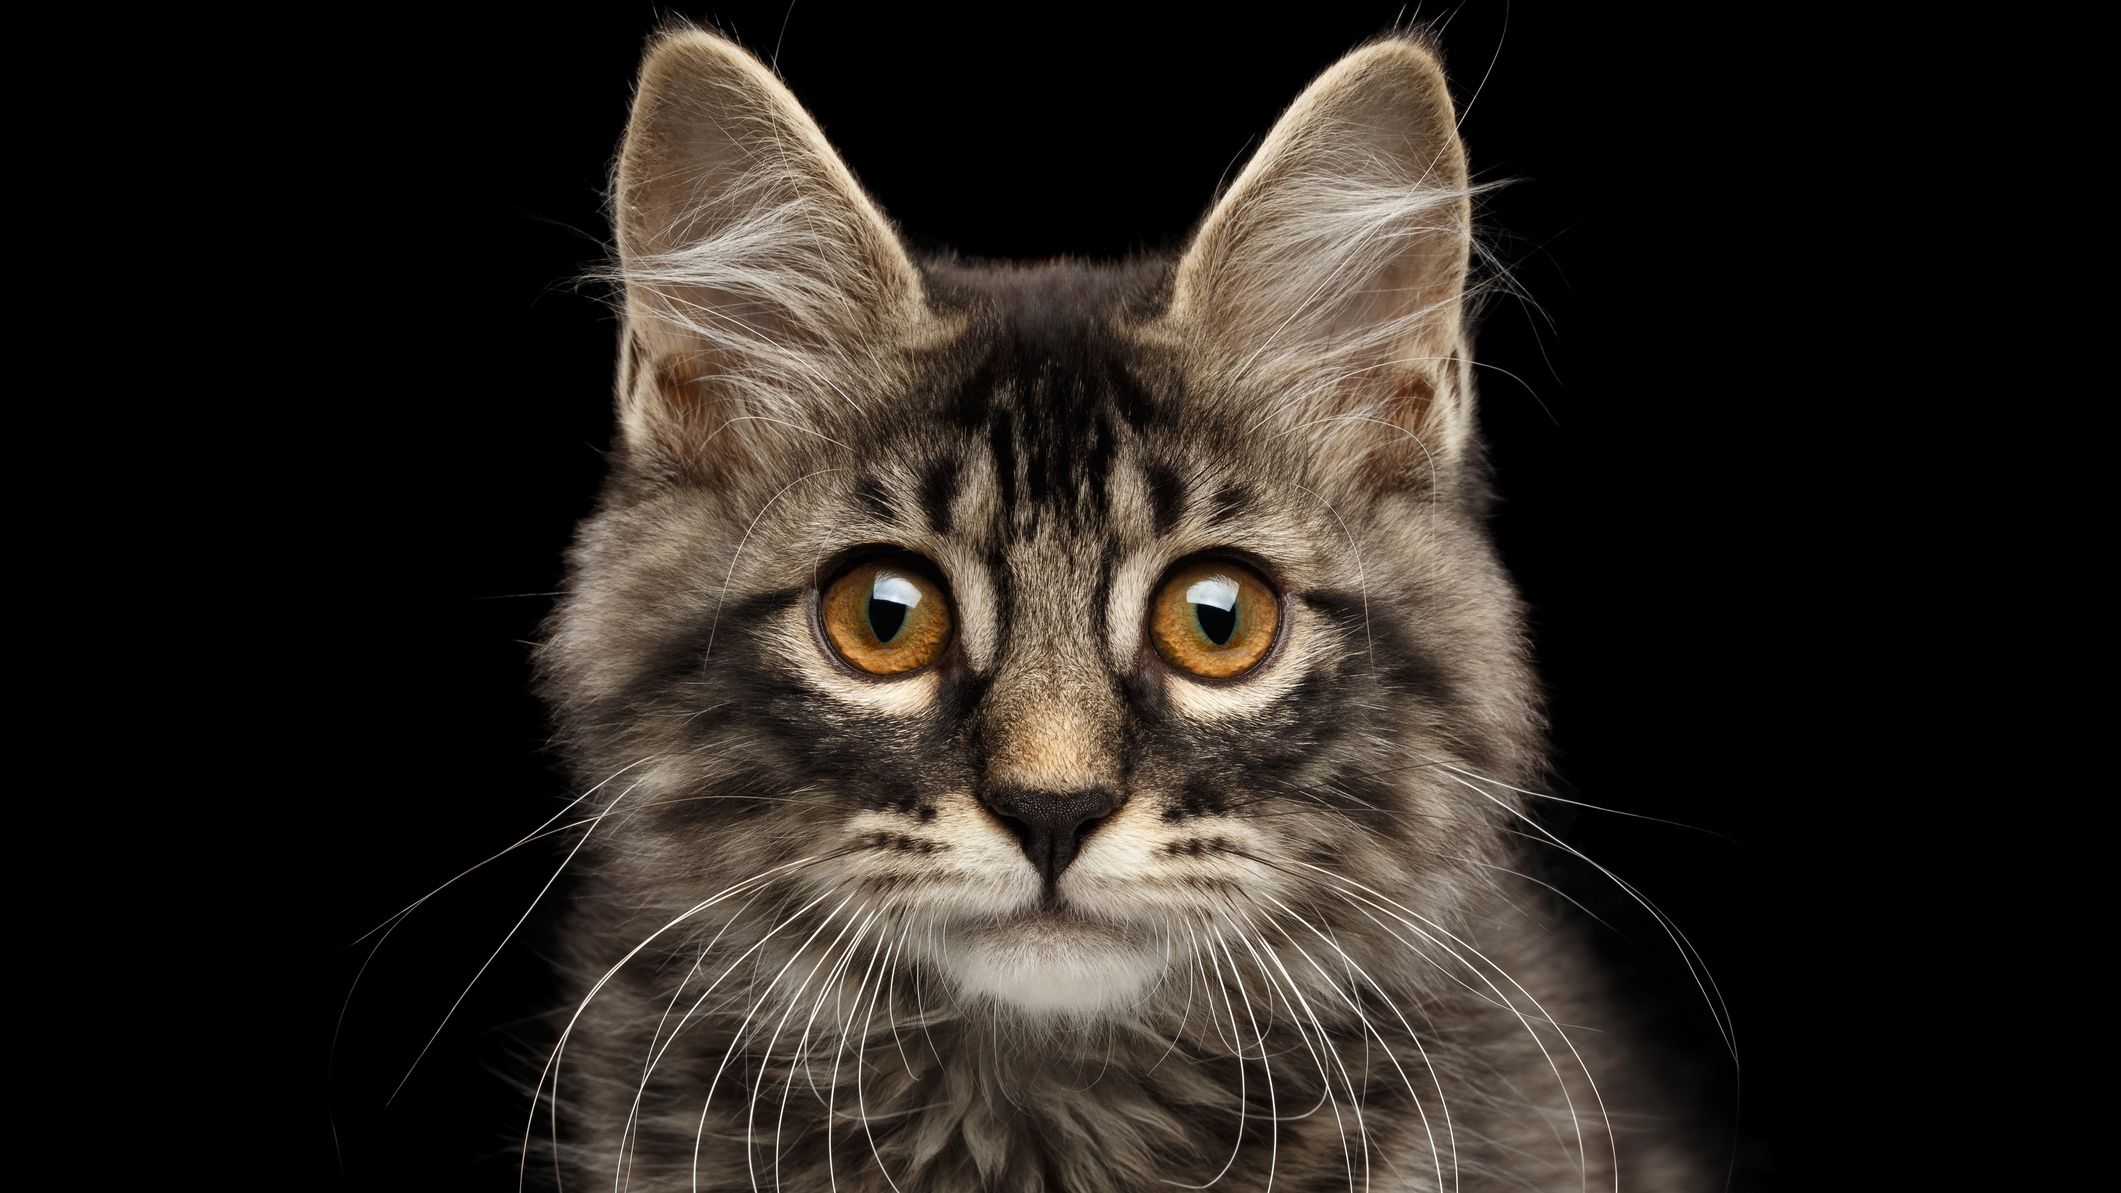 creepy facts about cats